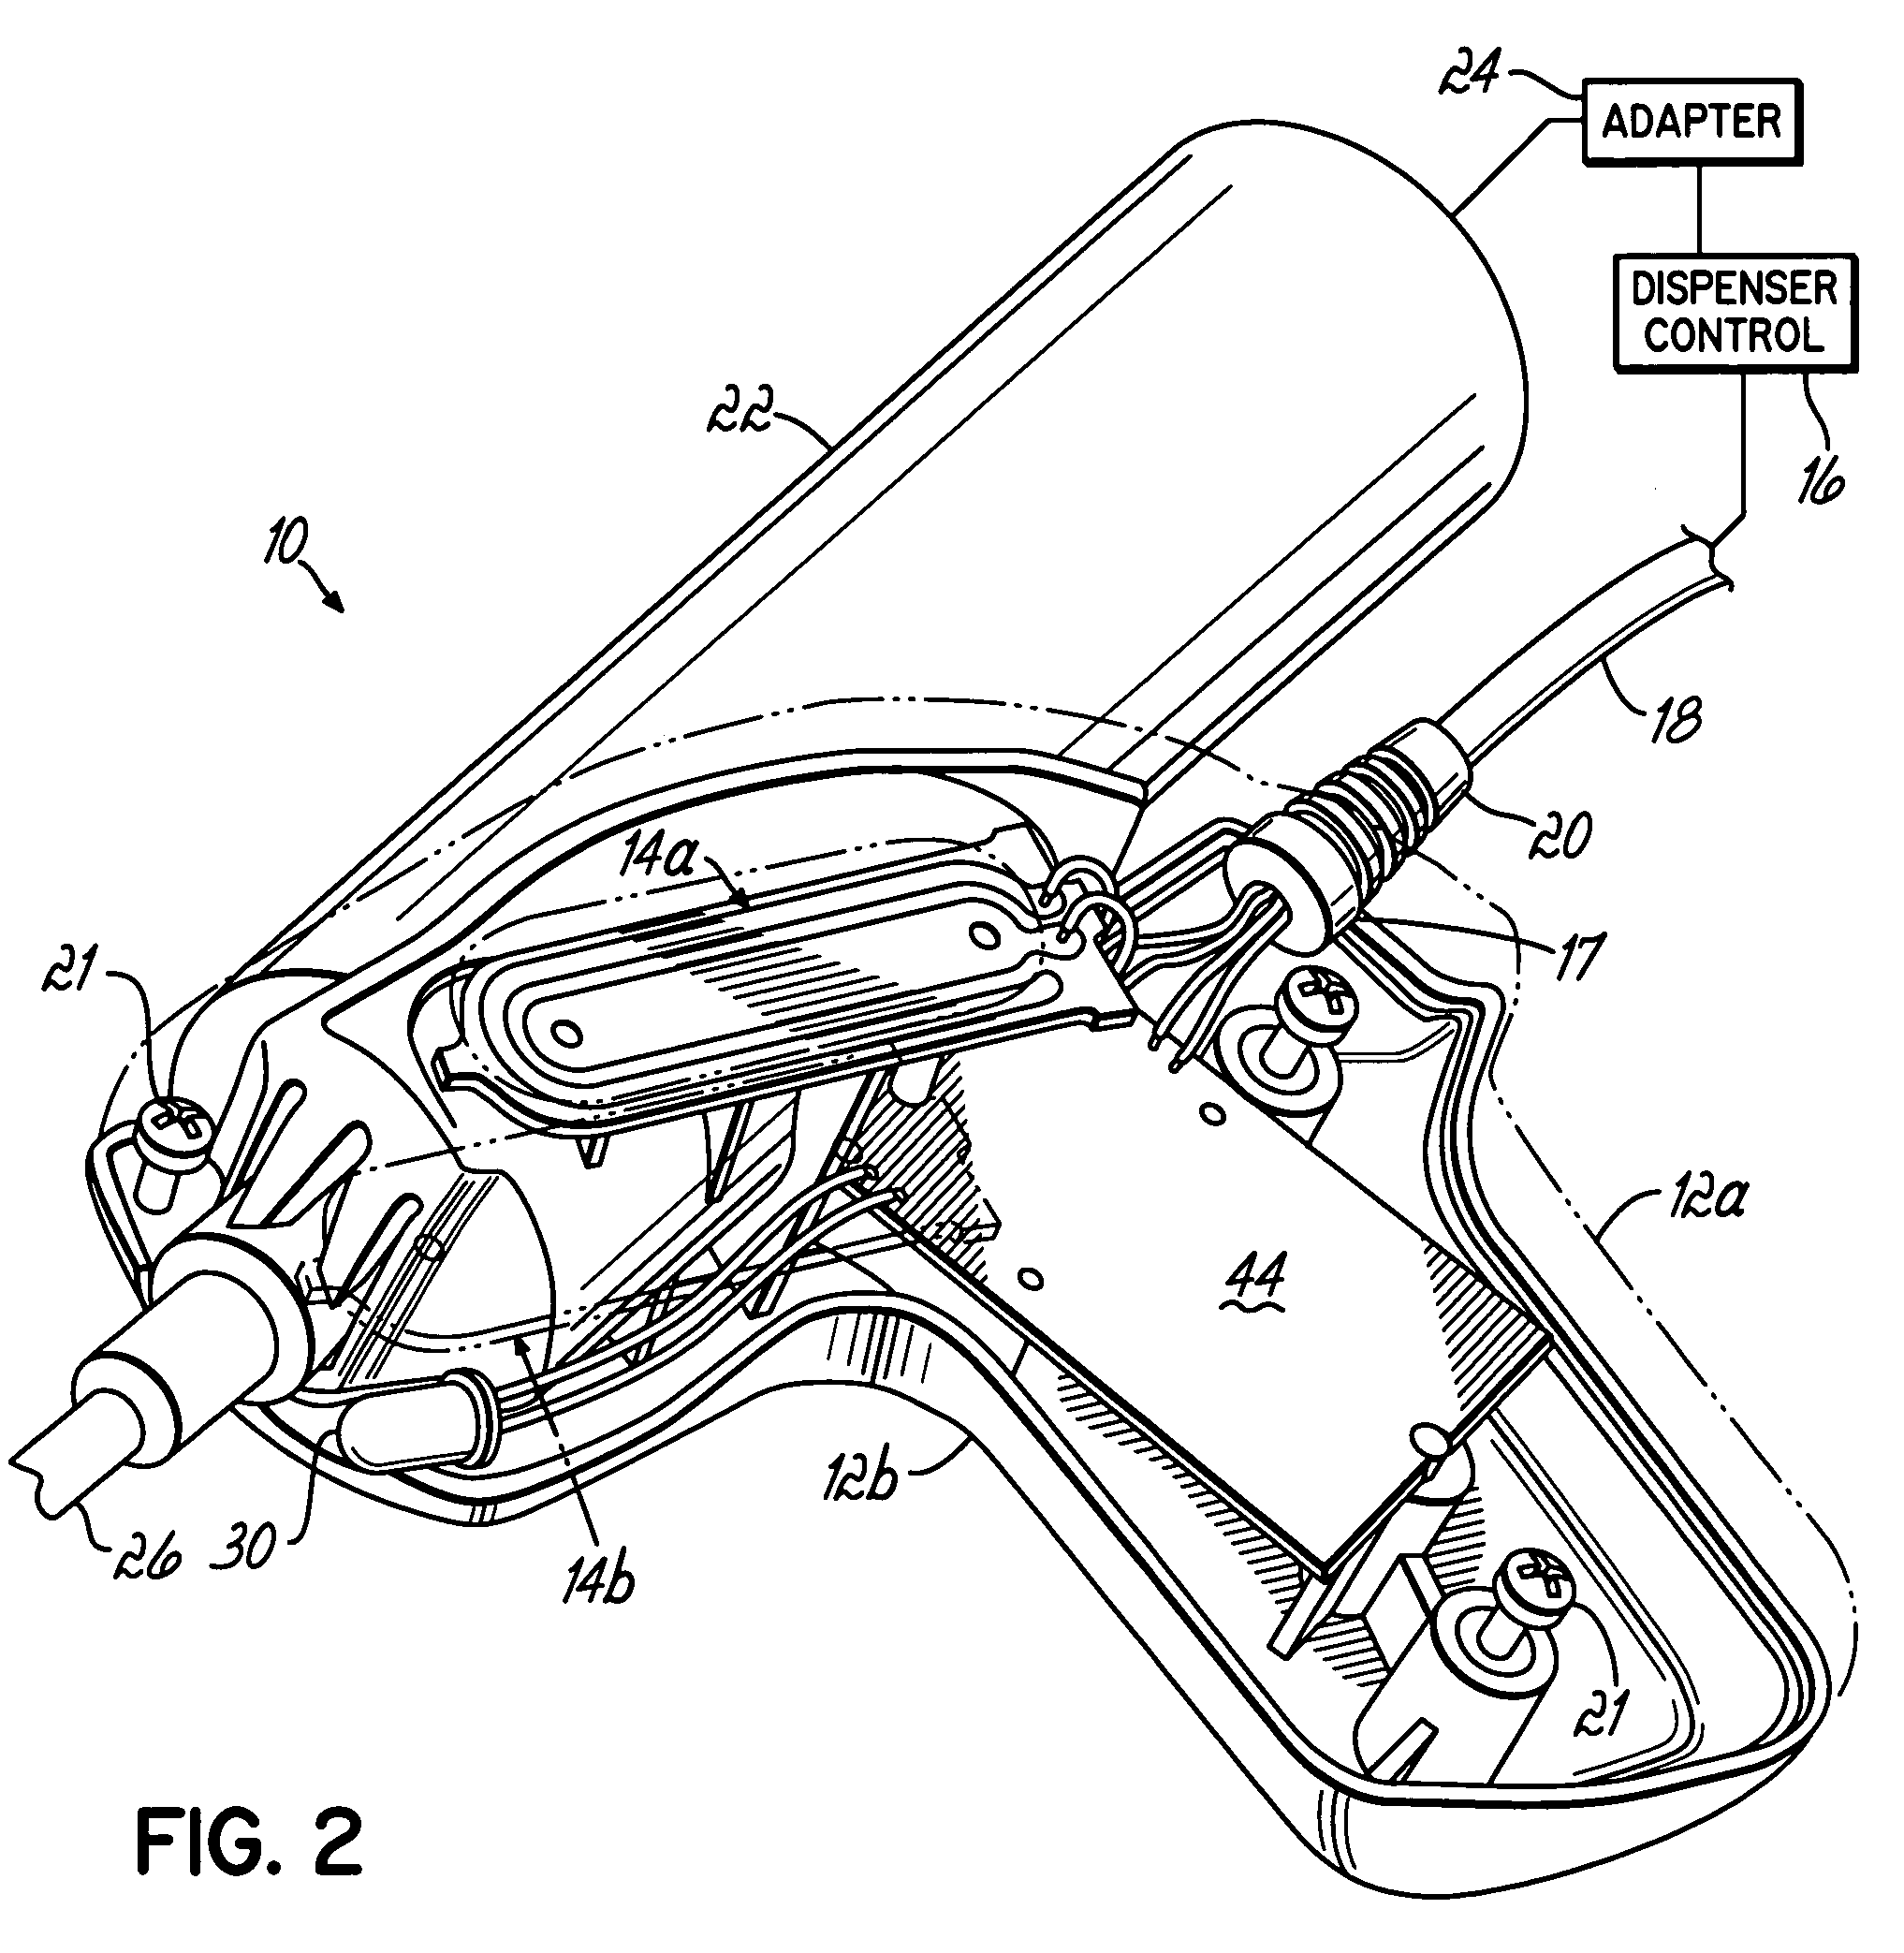 Hand-held fluid dispenser system and method of operating hand-held fluid dispenser systems